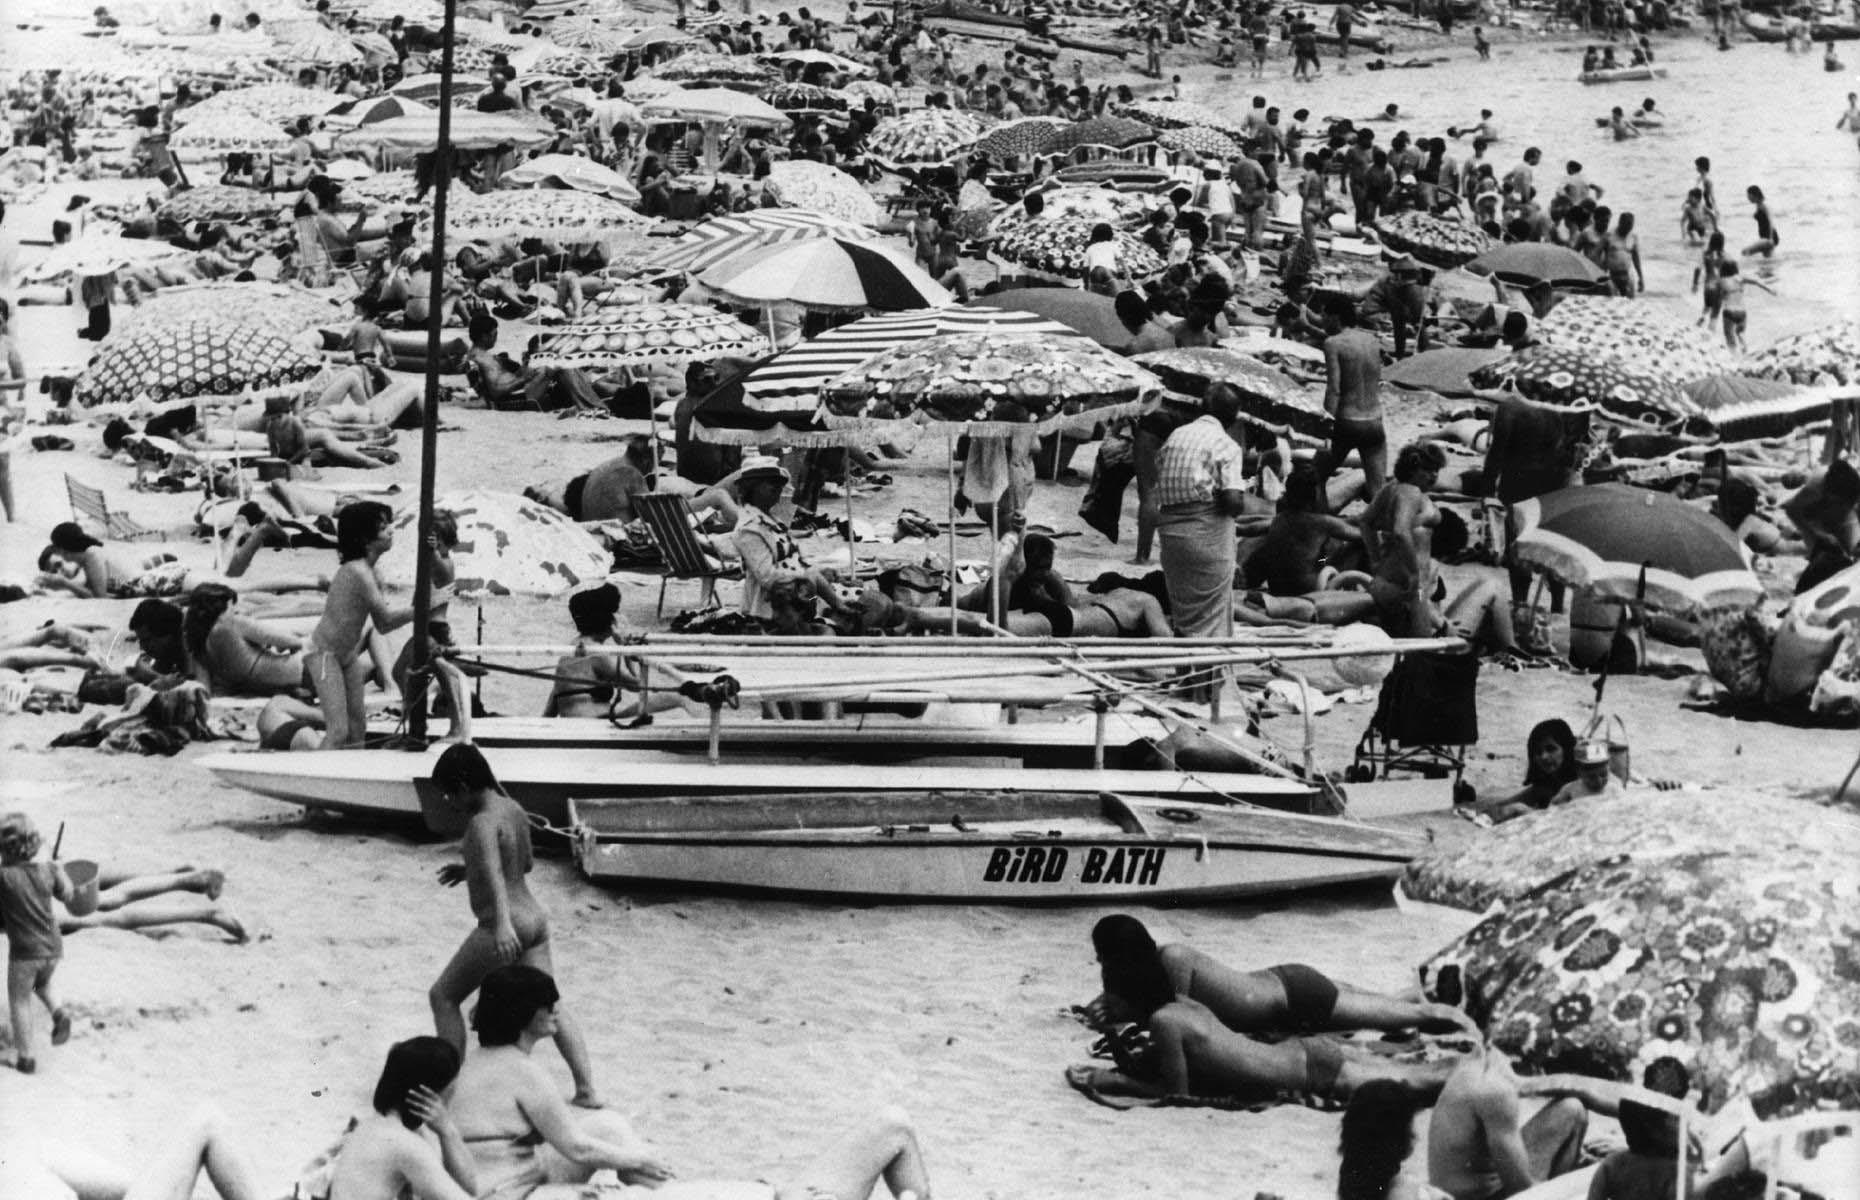 There was a steady uptick in tourism from the 1950s and 1960s onwards, as package vacations became a little more affordable. By the 1980s, Spain's beaches were thronged with people come summertime. Here, families cruise on inflatables in the ocean or sit elbow-to-elbow on the shores, shading themselves under umbrellas. This snap was taken in Palamós, another top Costa Brava destination for Brits, in 1981.